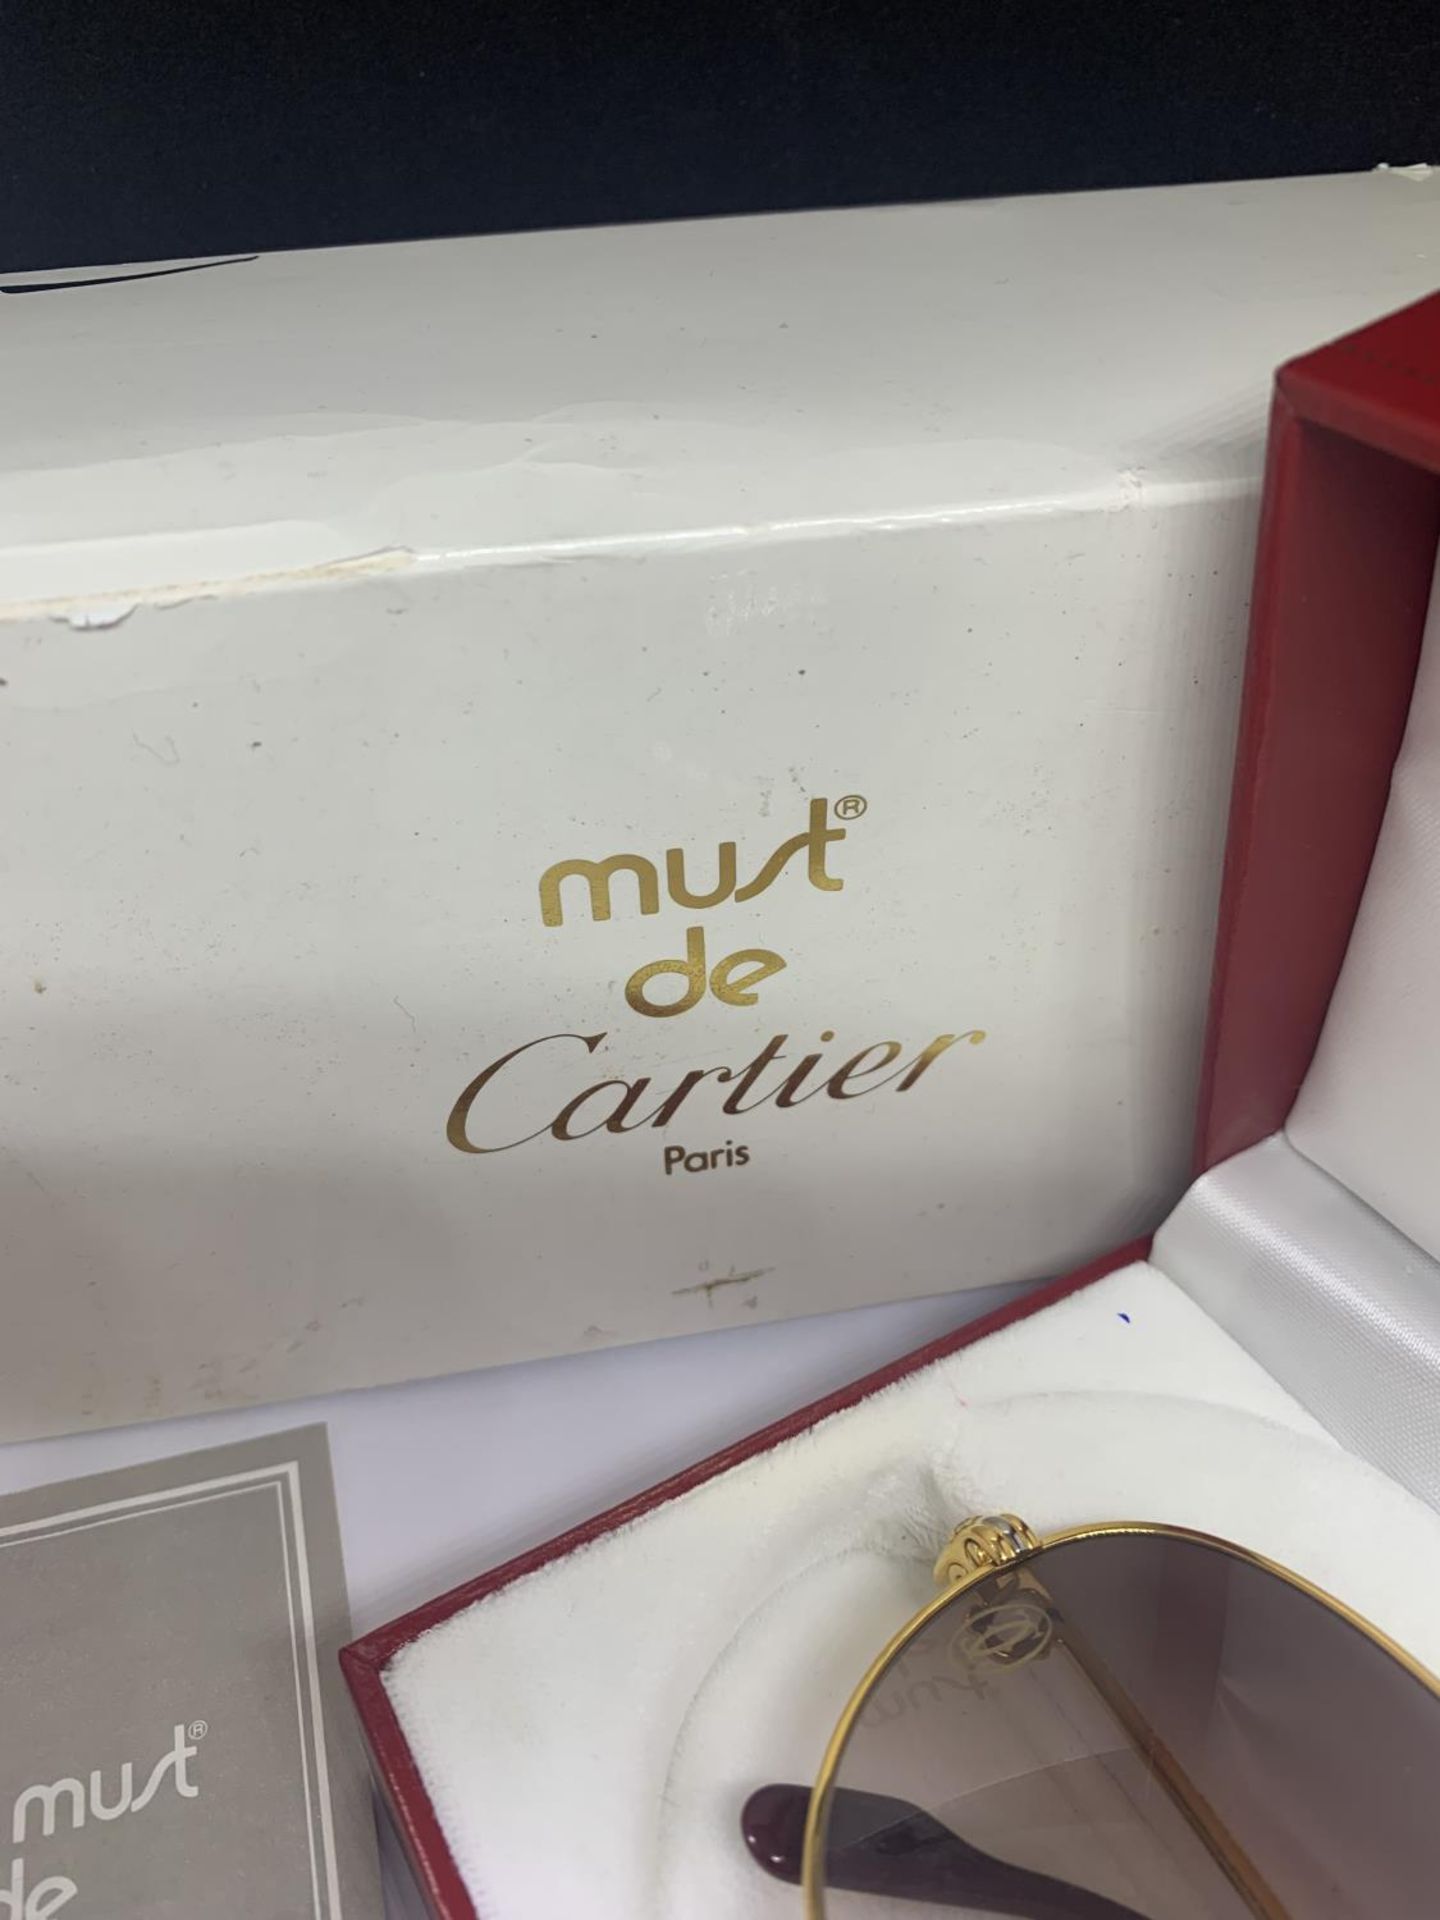 A PAIR OF MUST DE CARTIER PARIS SUNGLASSES WITH DIAMOND DECORATION TO THE SIDE. ORIGINAL BOX AND - Image 4 of 22